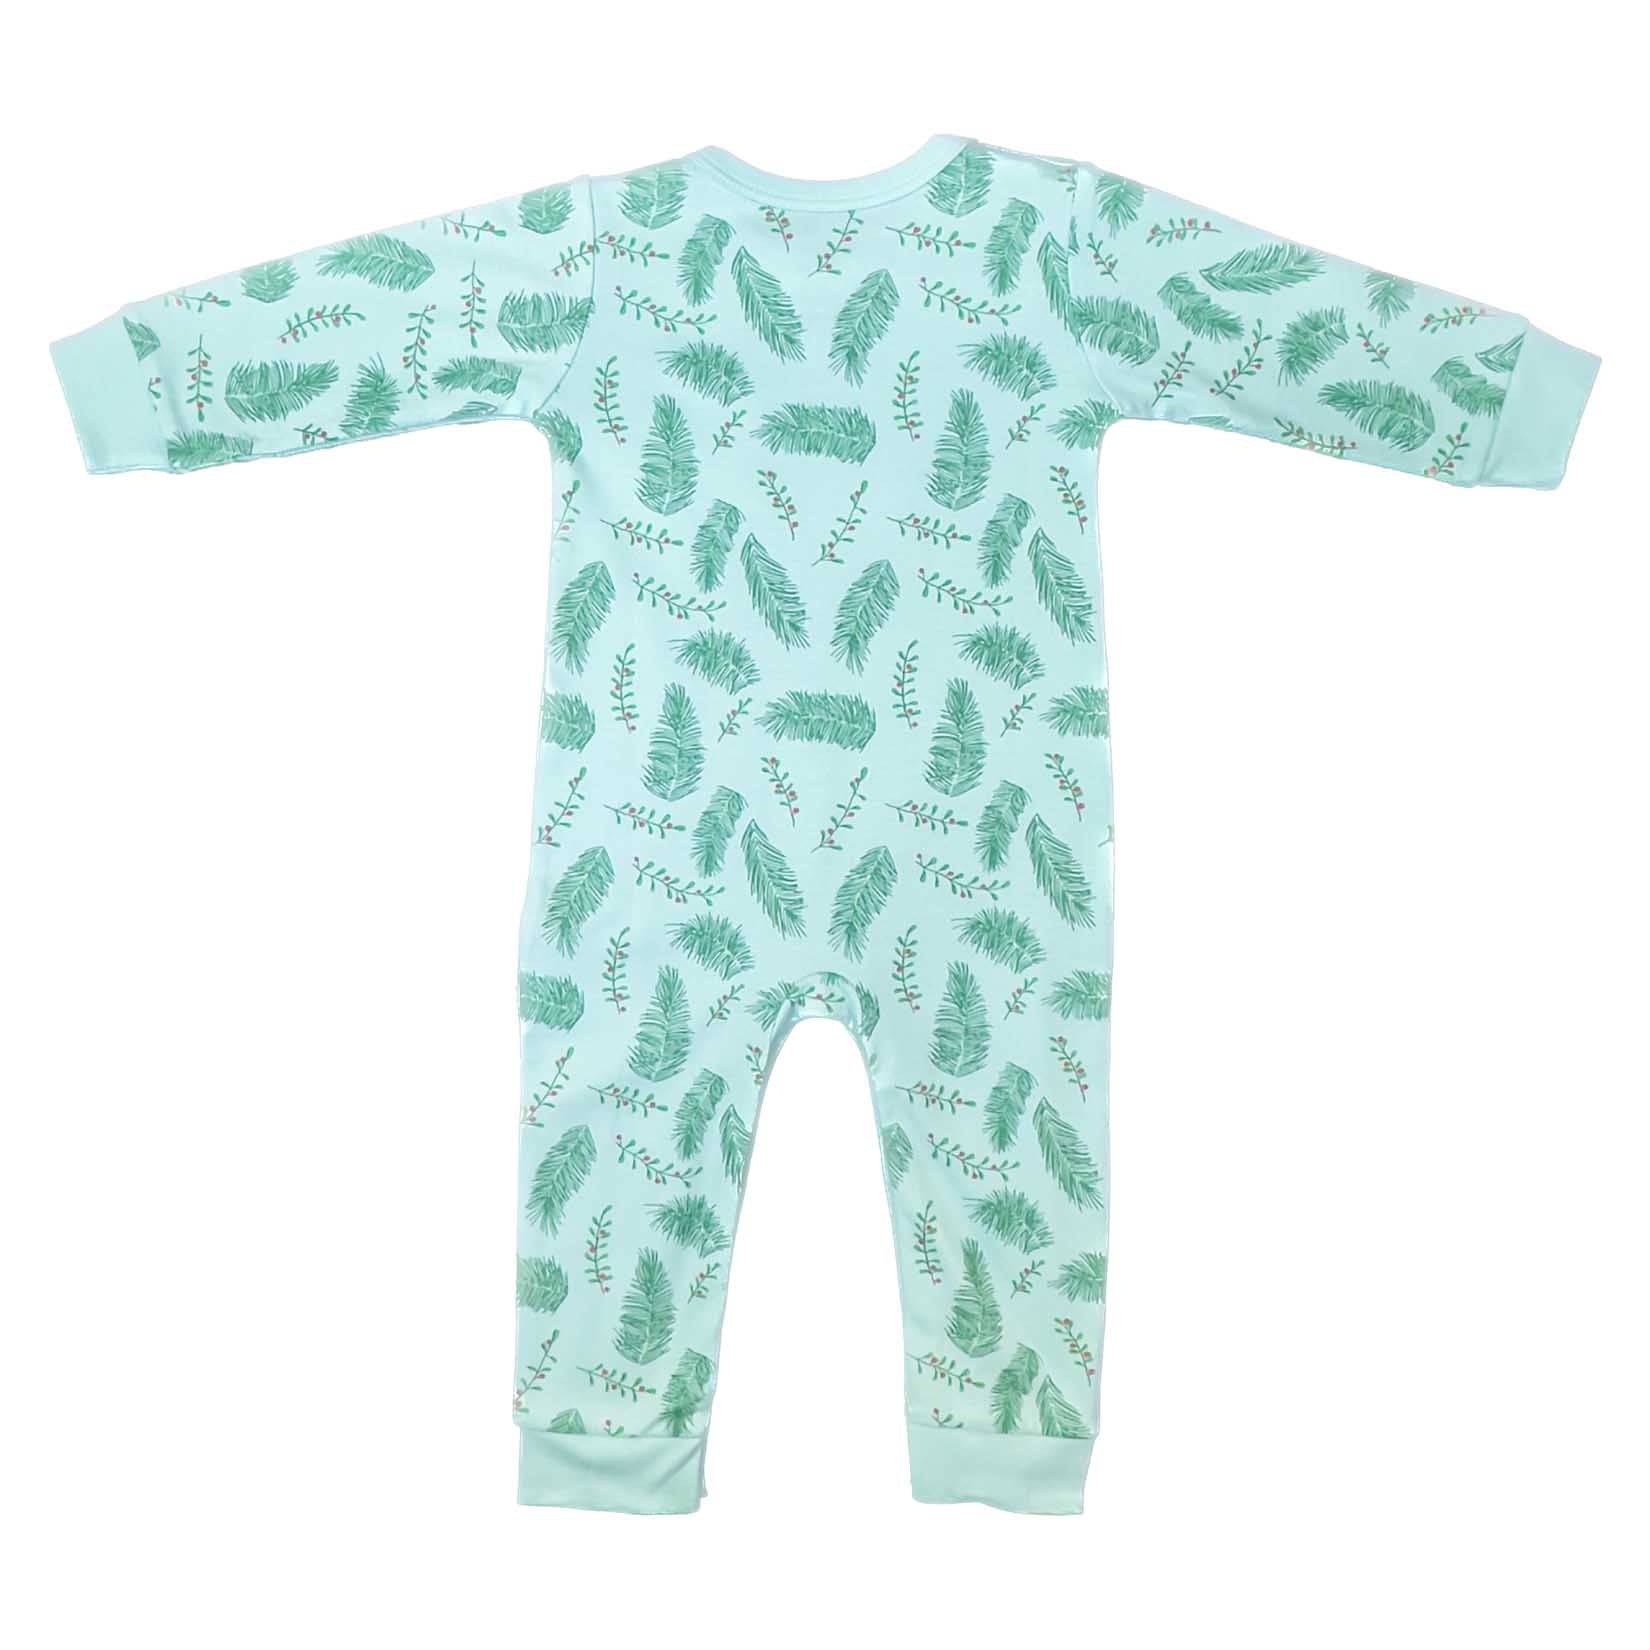 Back of Heyward House long sleeve romper with holly and pine pattern with vintage blue tint background made of Pima